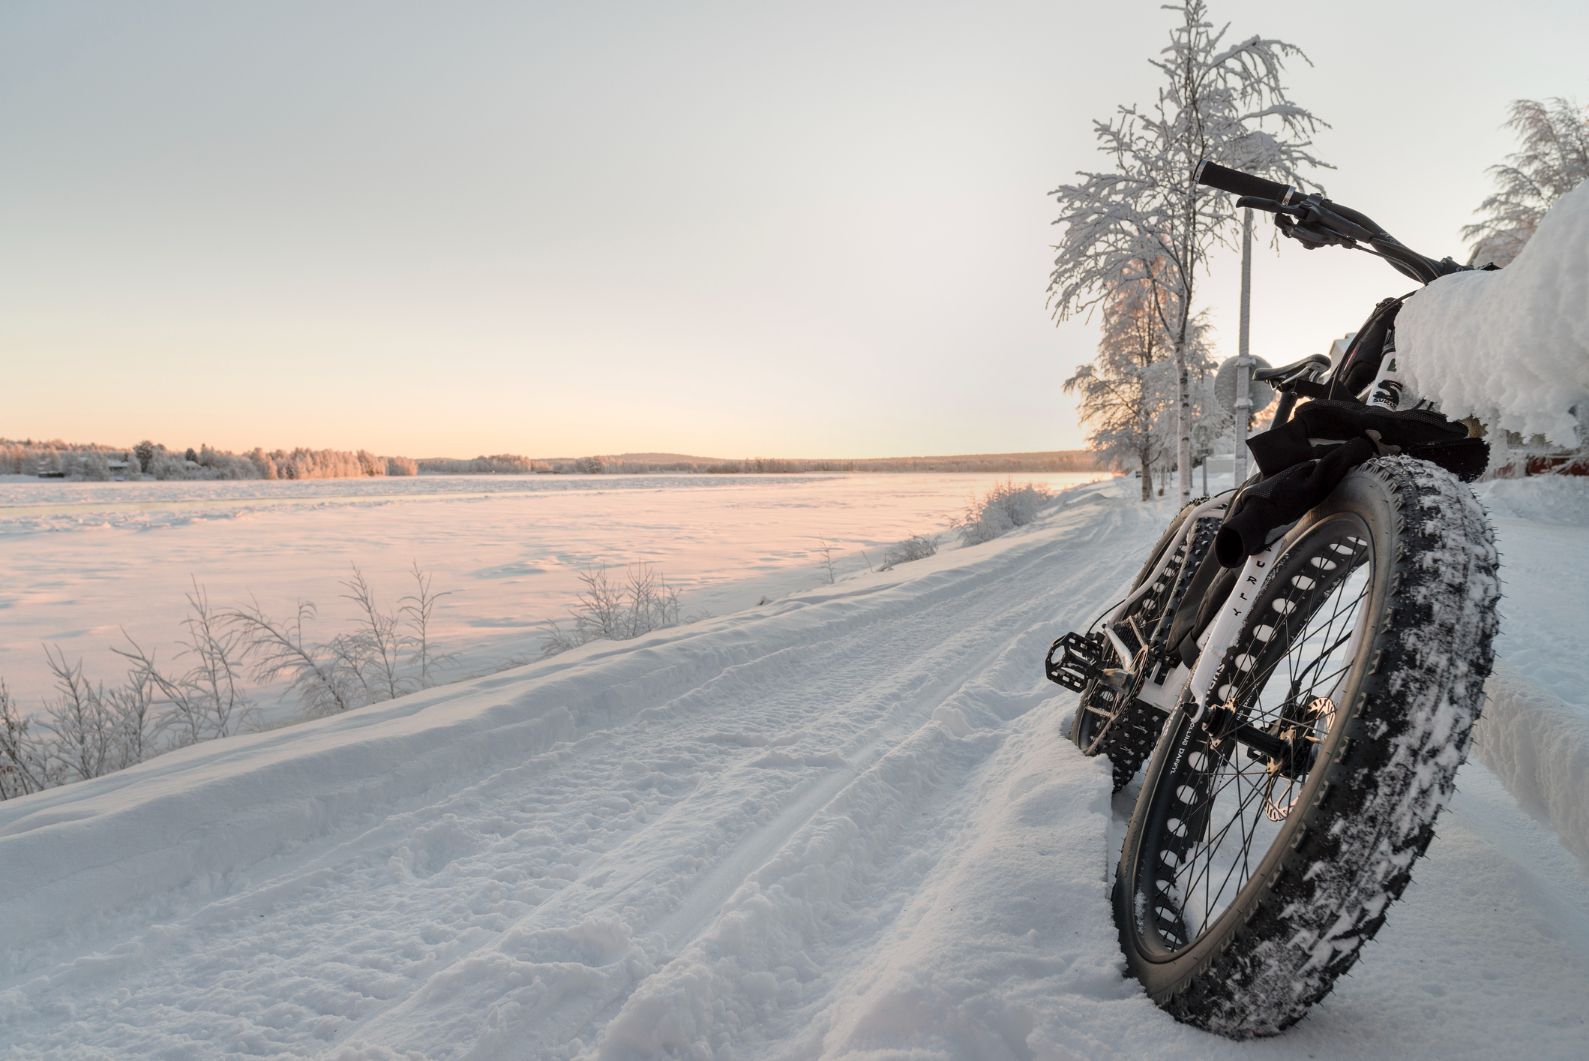 The wheels of a fat bike in the Arctic Circle, in a snowy landscape.